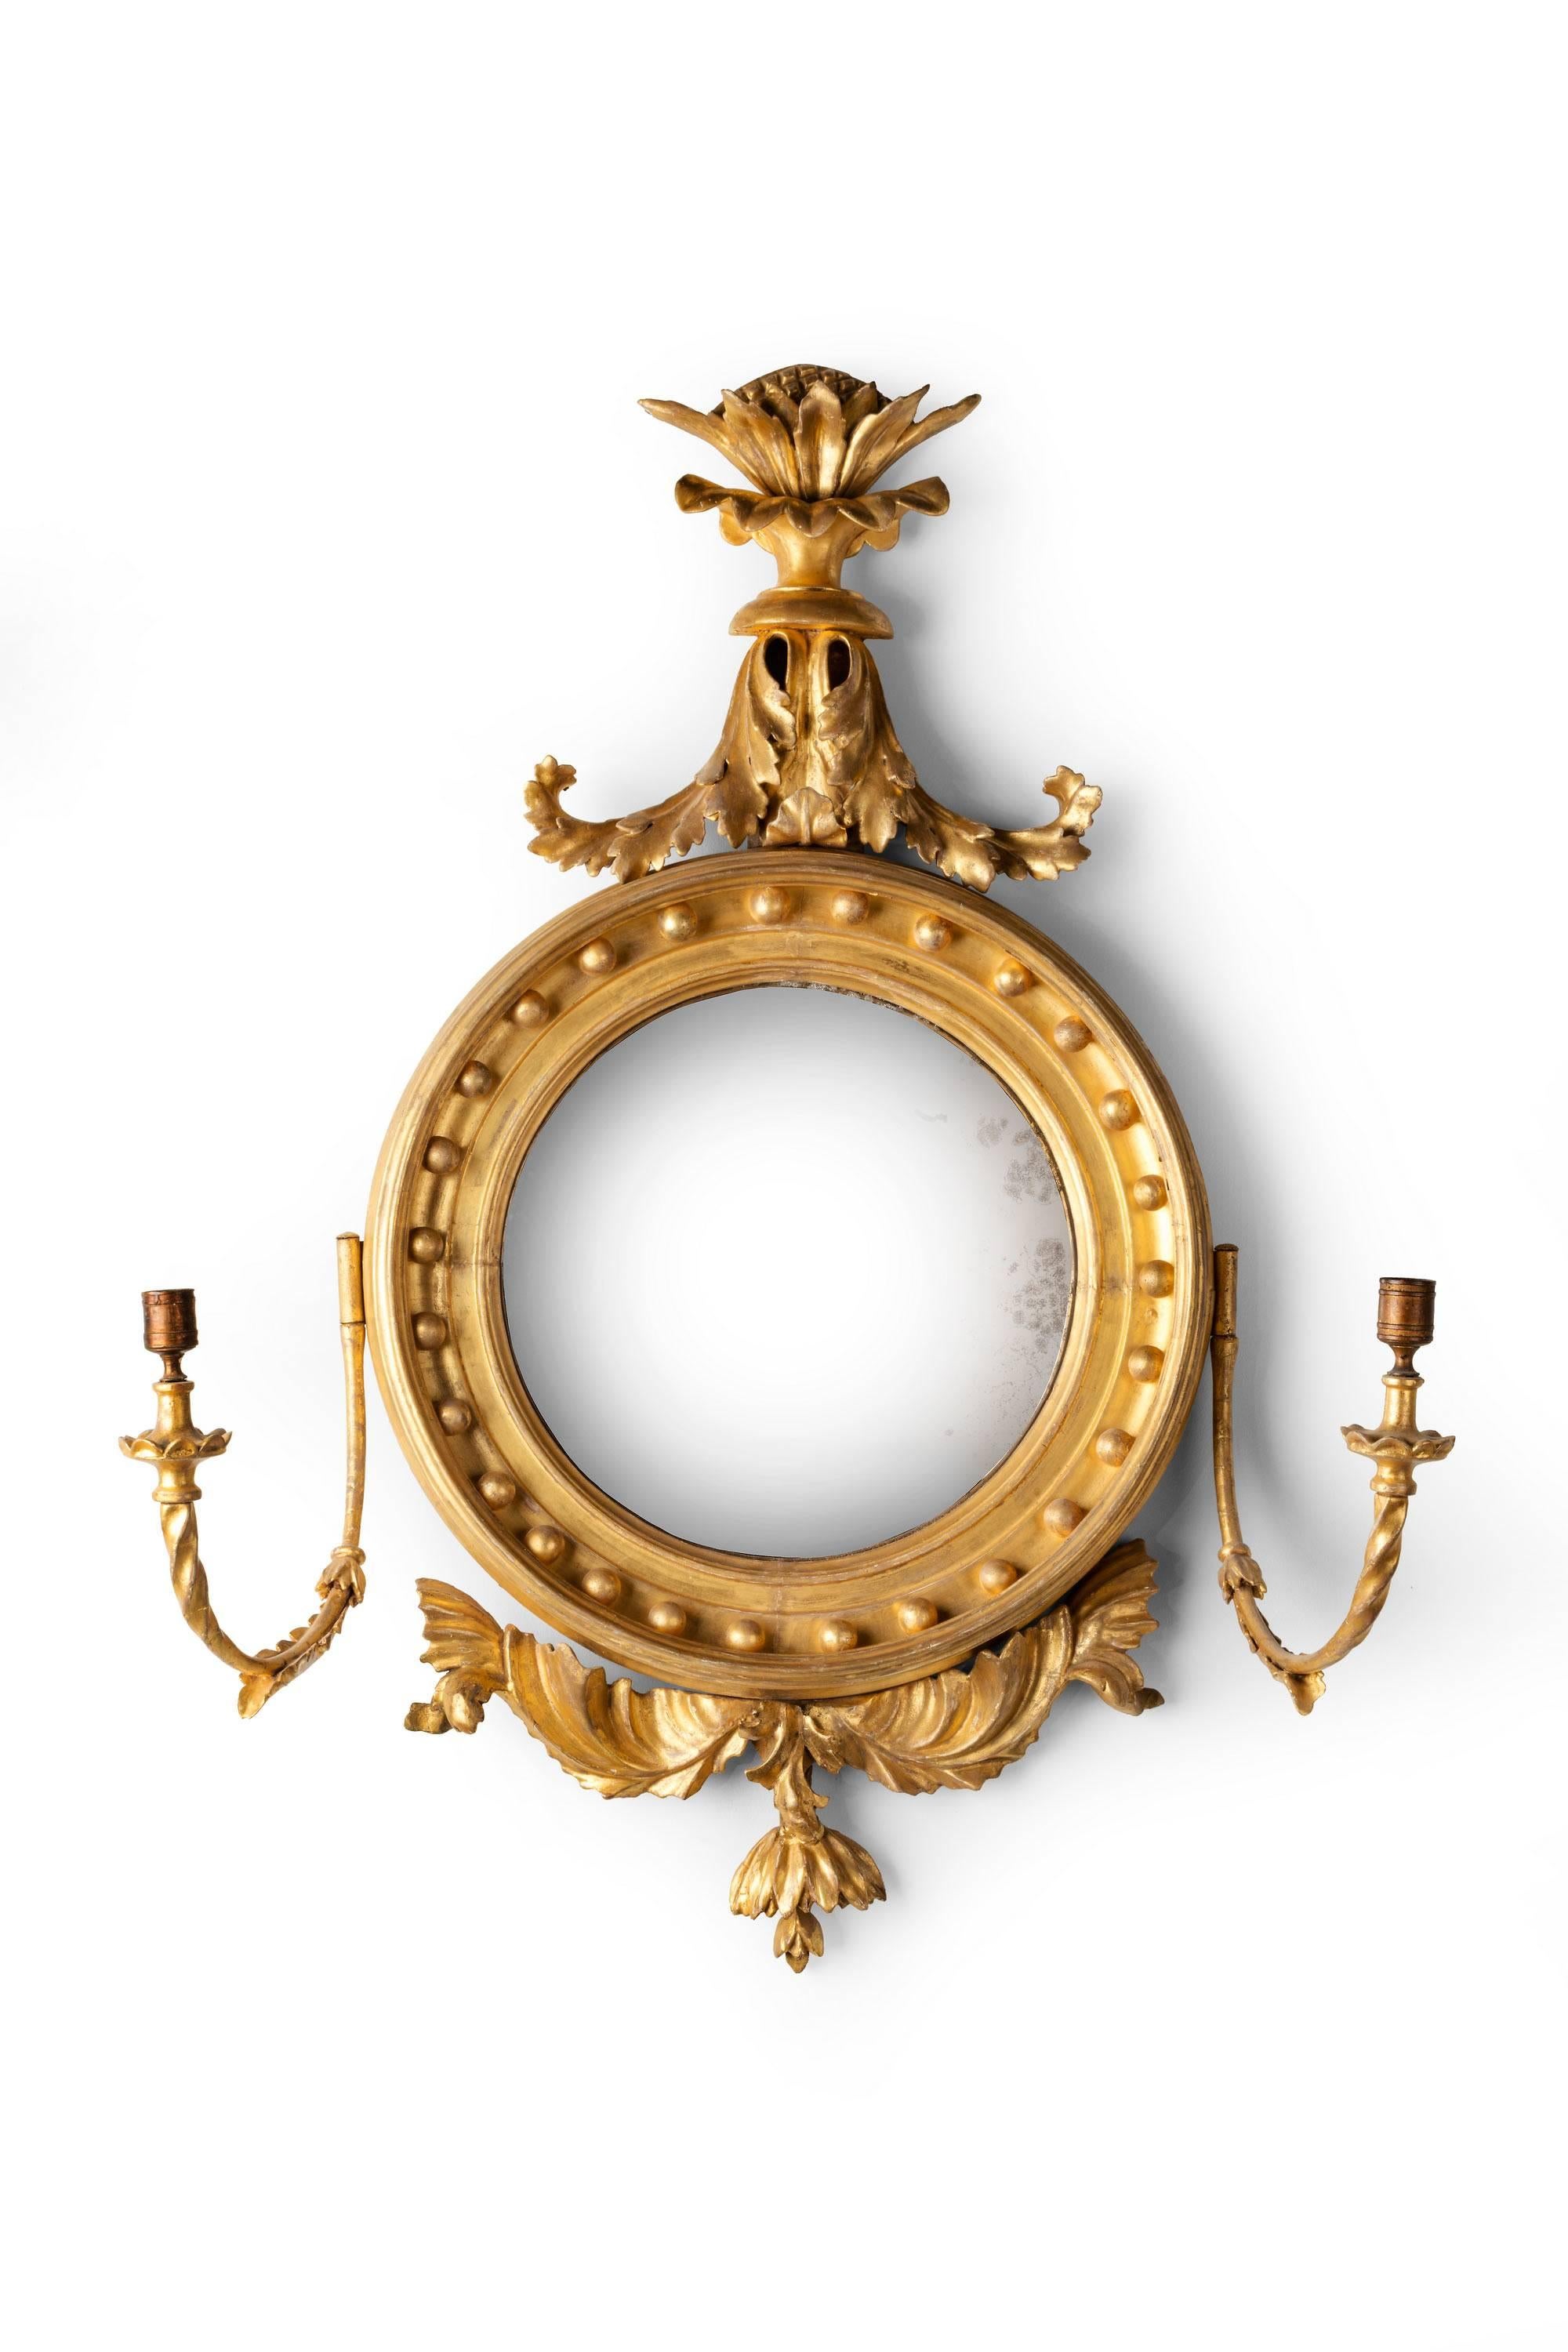 Regency period giltwood convex mirror with girandole candle arms.

